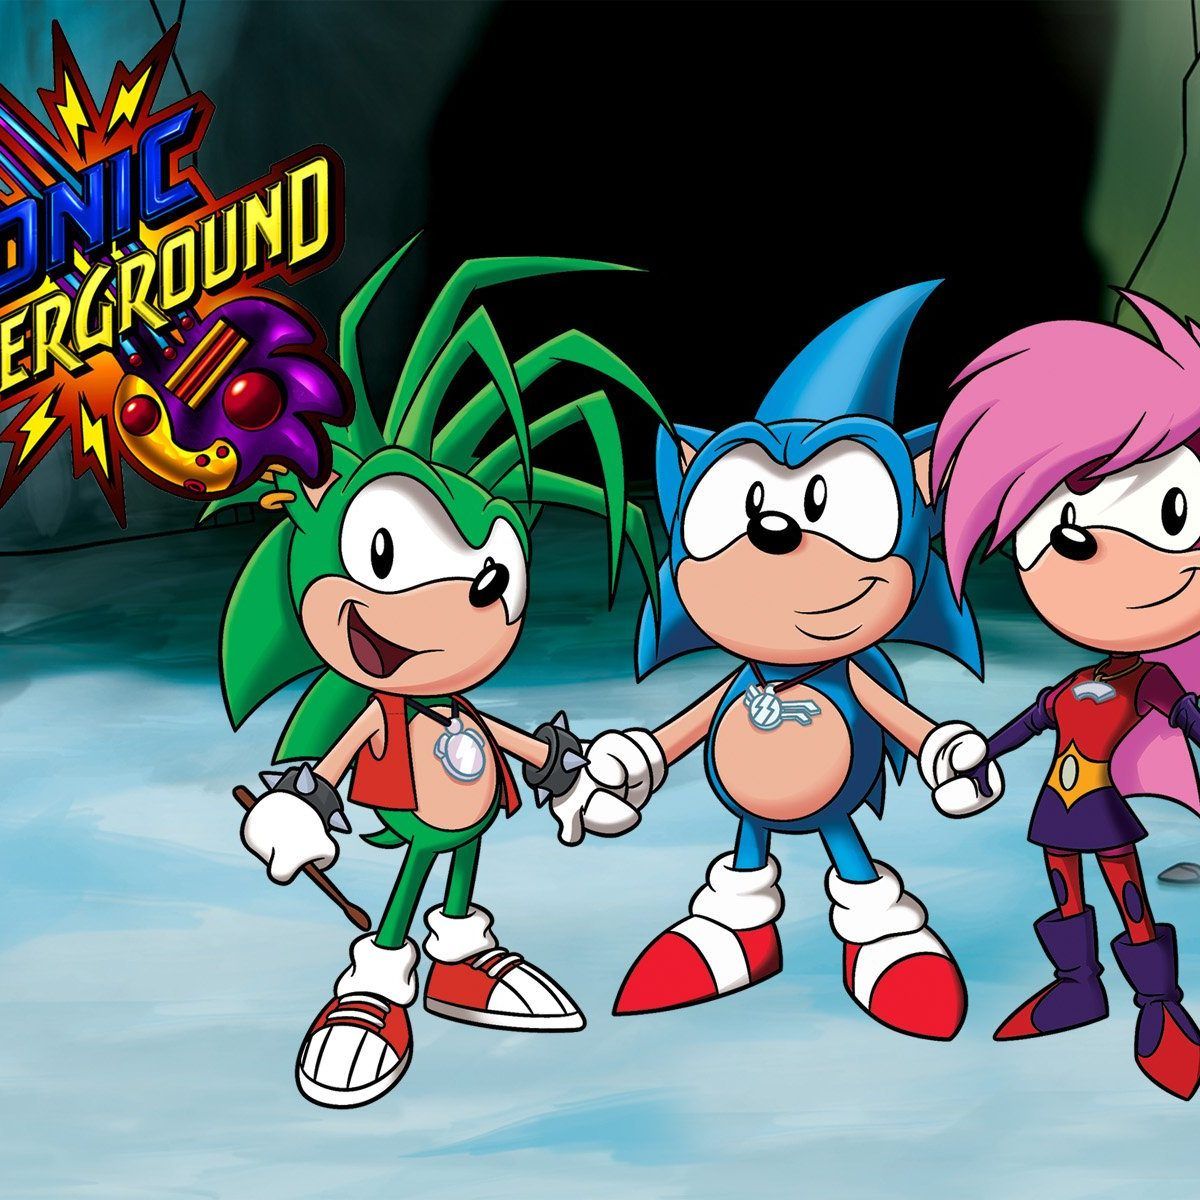 Sonic Underground - A Twentieth Anniversary Retrospective. A Place to Hang Your Cape